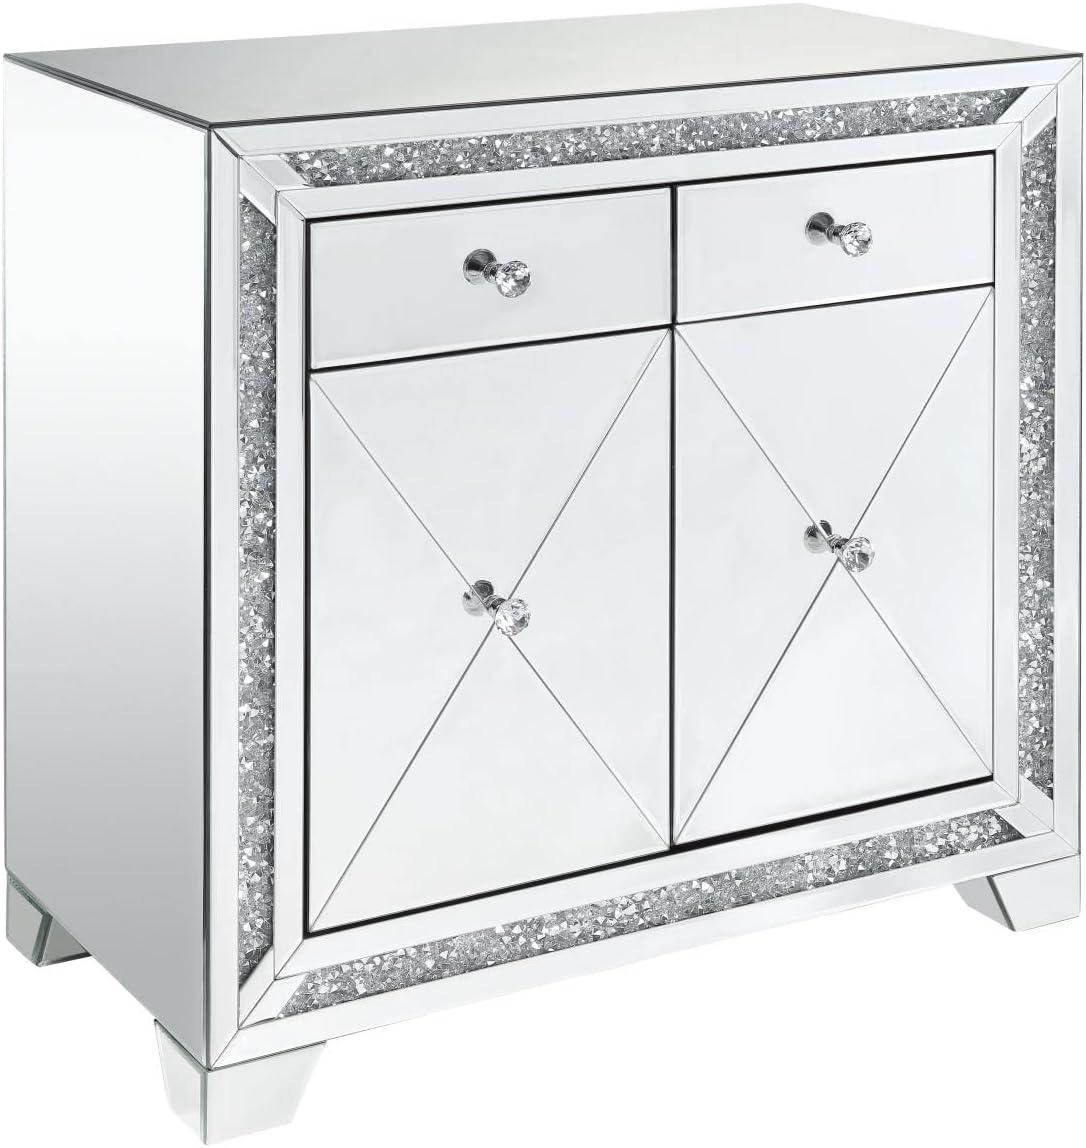 Glamorous Mirrored & Wood 32" Console Table with Faux Diamond Inlays